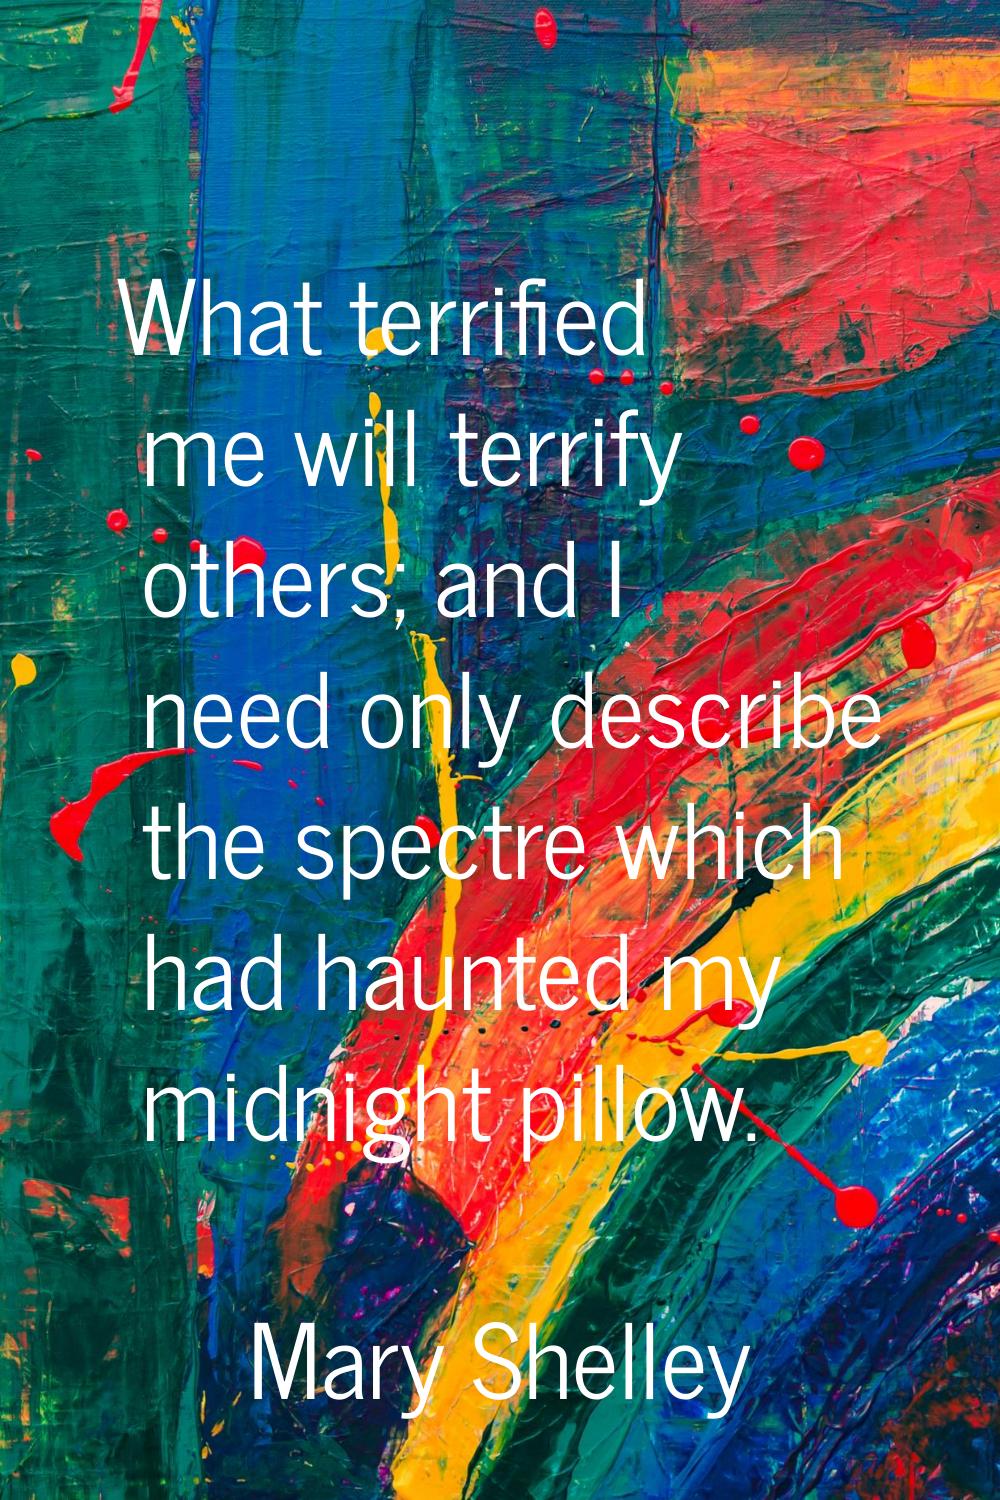 What terrified me will terrify others; and I need only describe the spectre which had haunted my mi